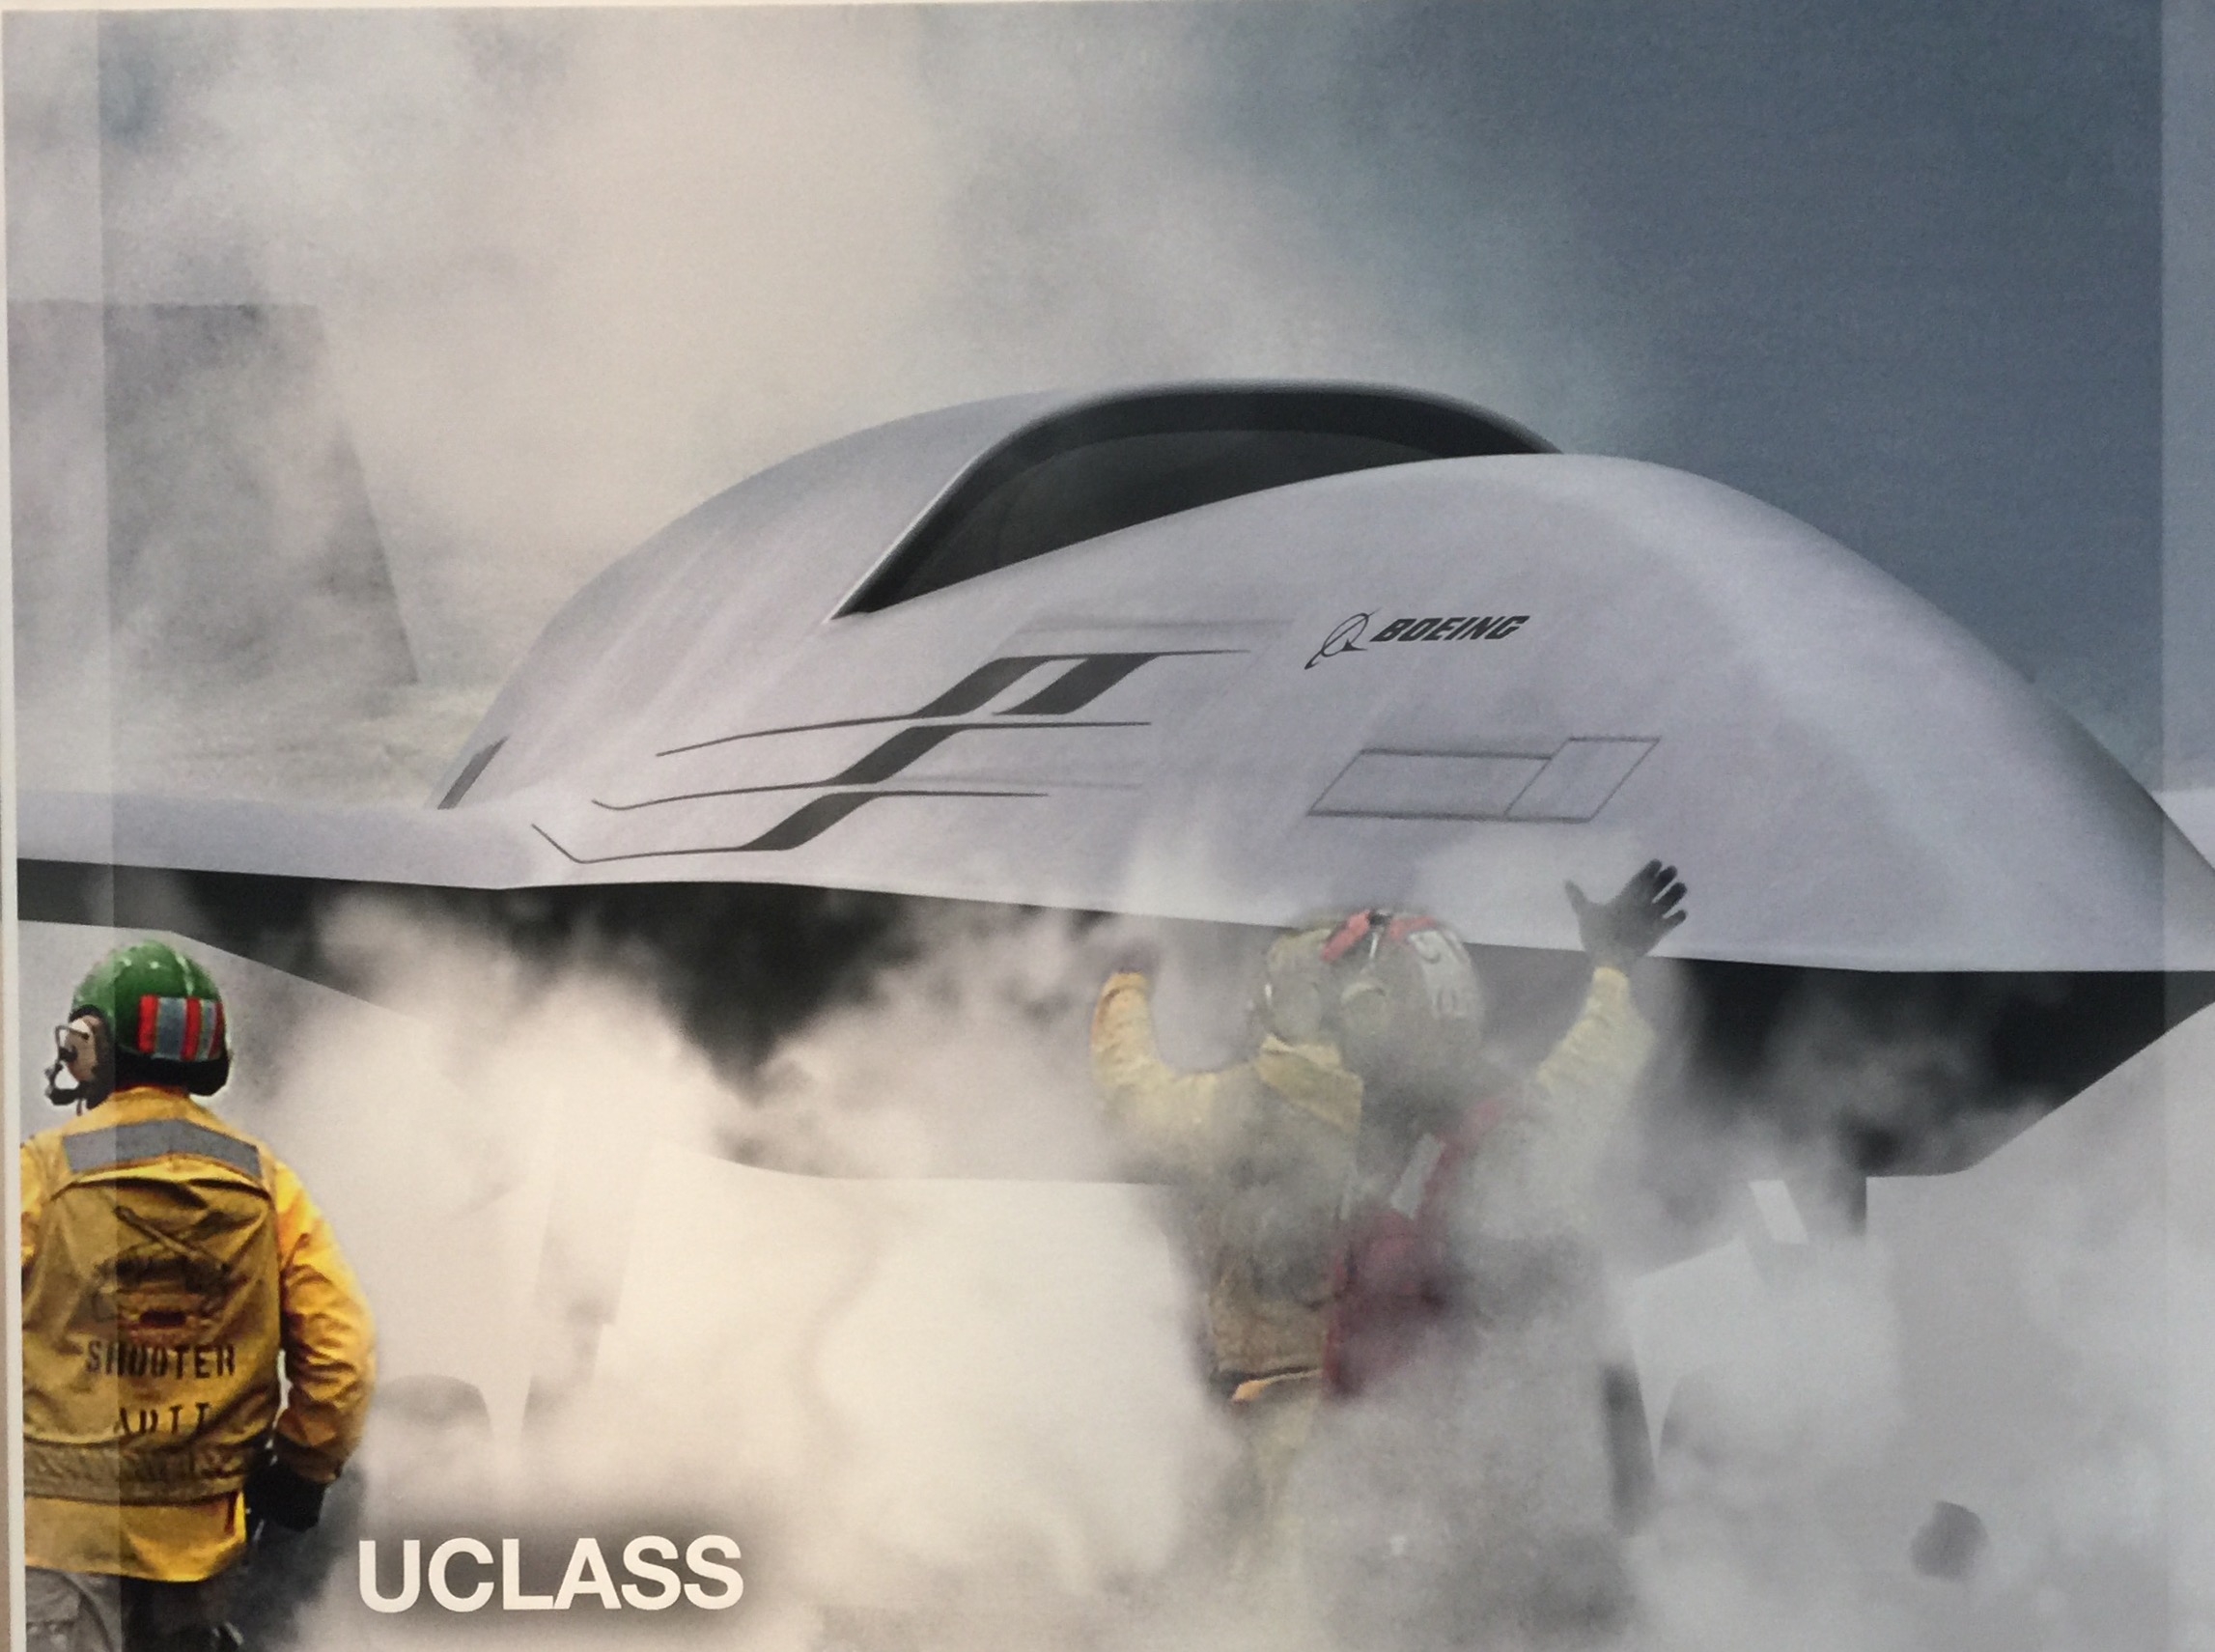 An artist's conception of Boeing's UCLASS offering taken as part of the company's display at the U.S. Navy League 2015 Sea Air Space Exposition. US Naval Institute Photo